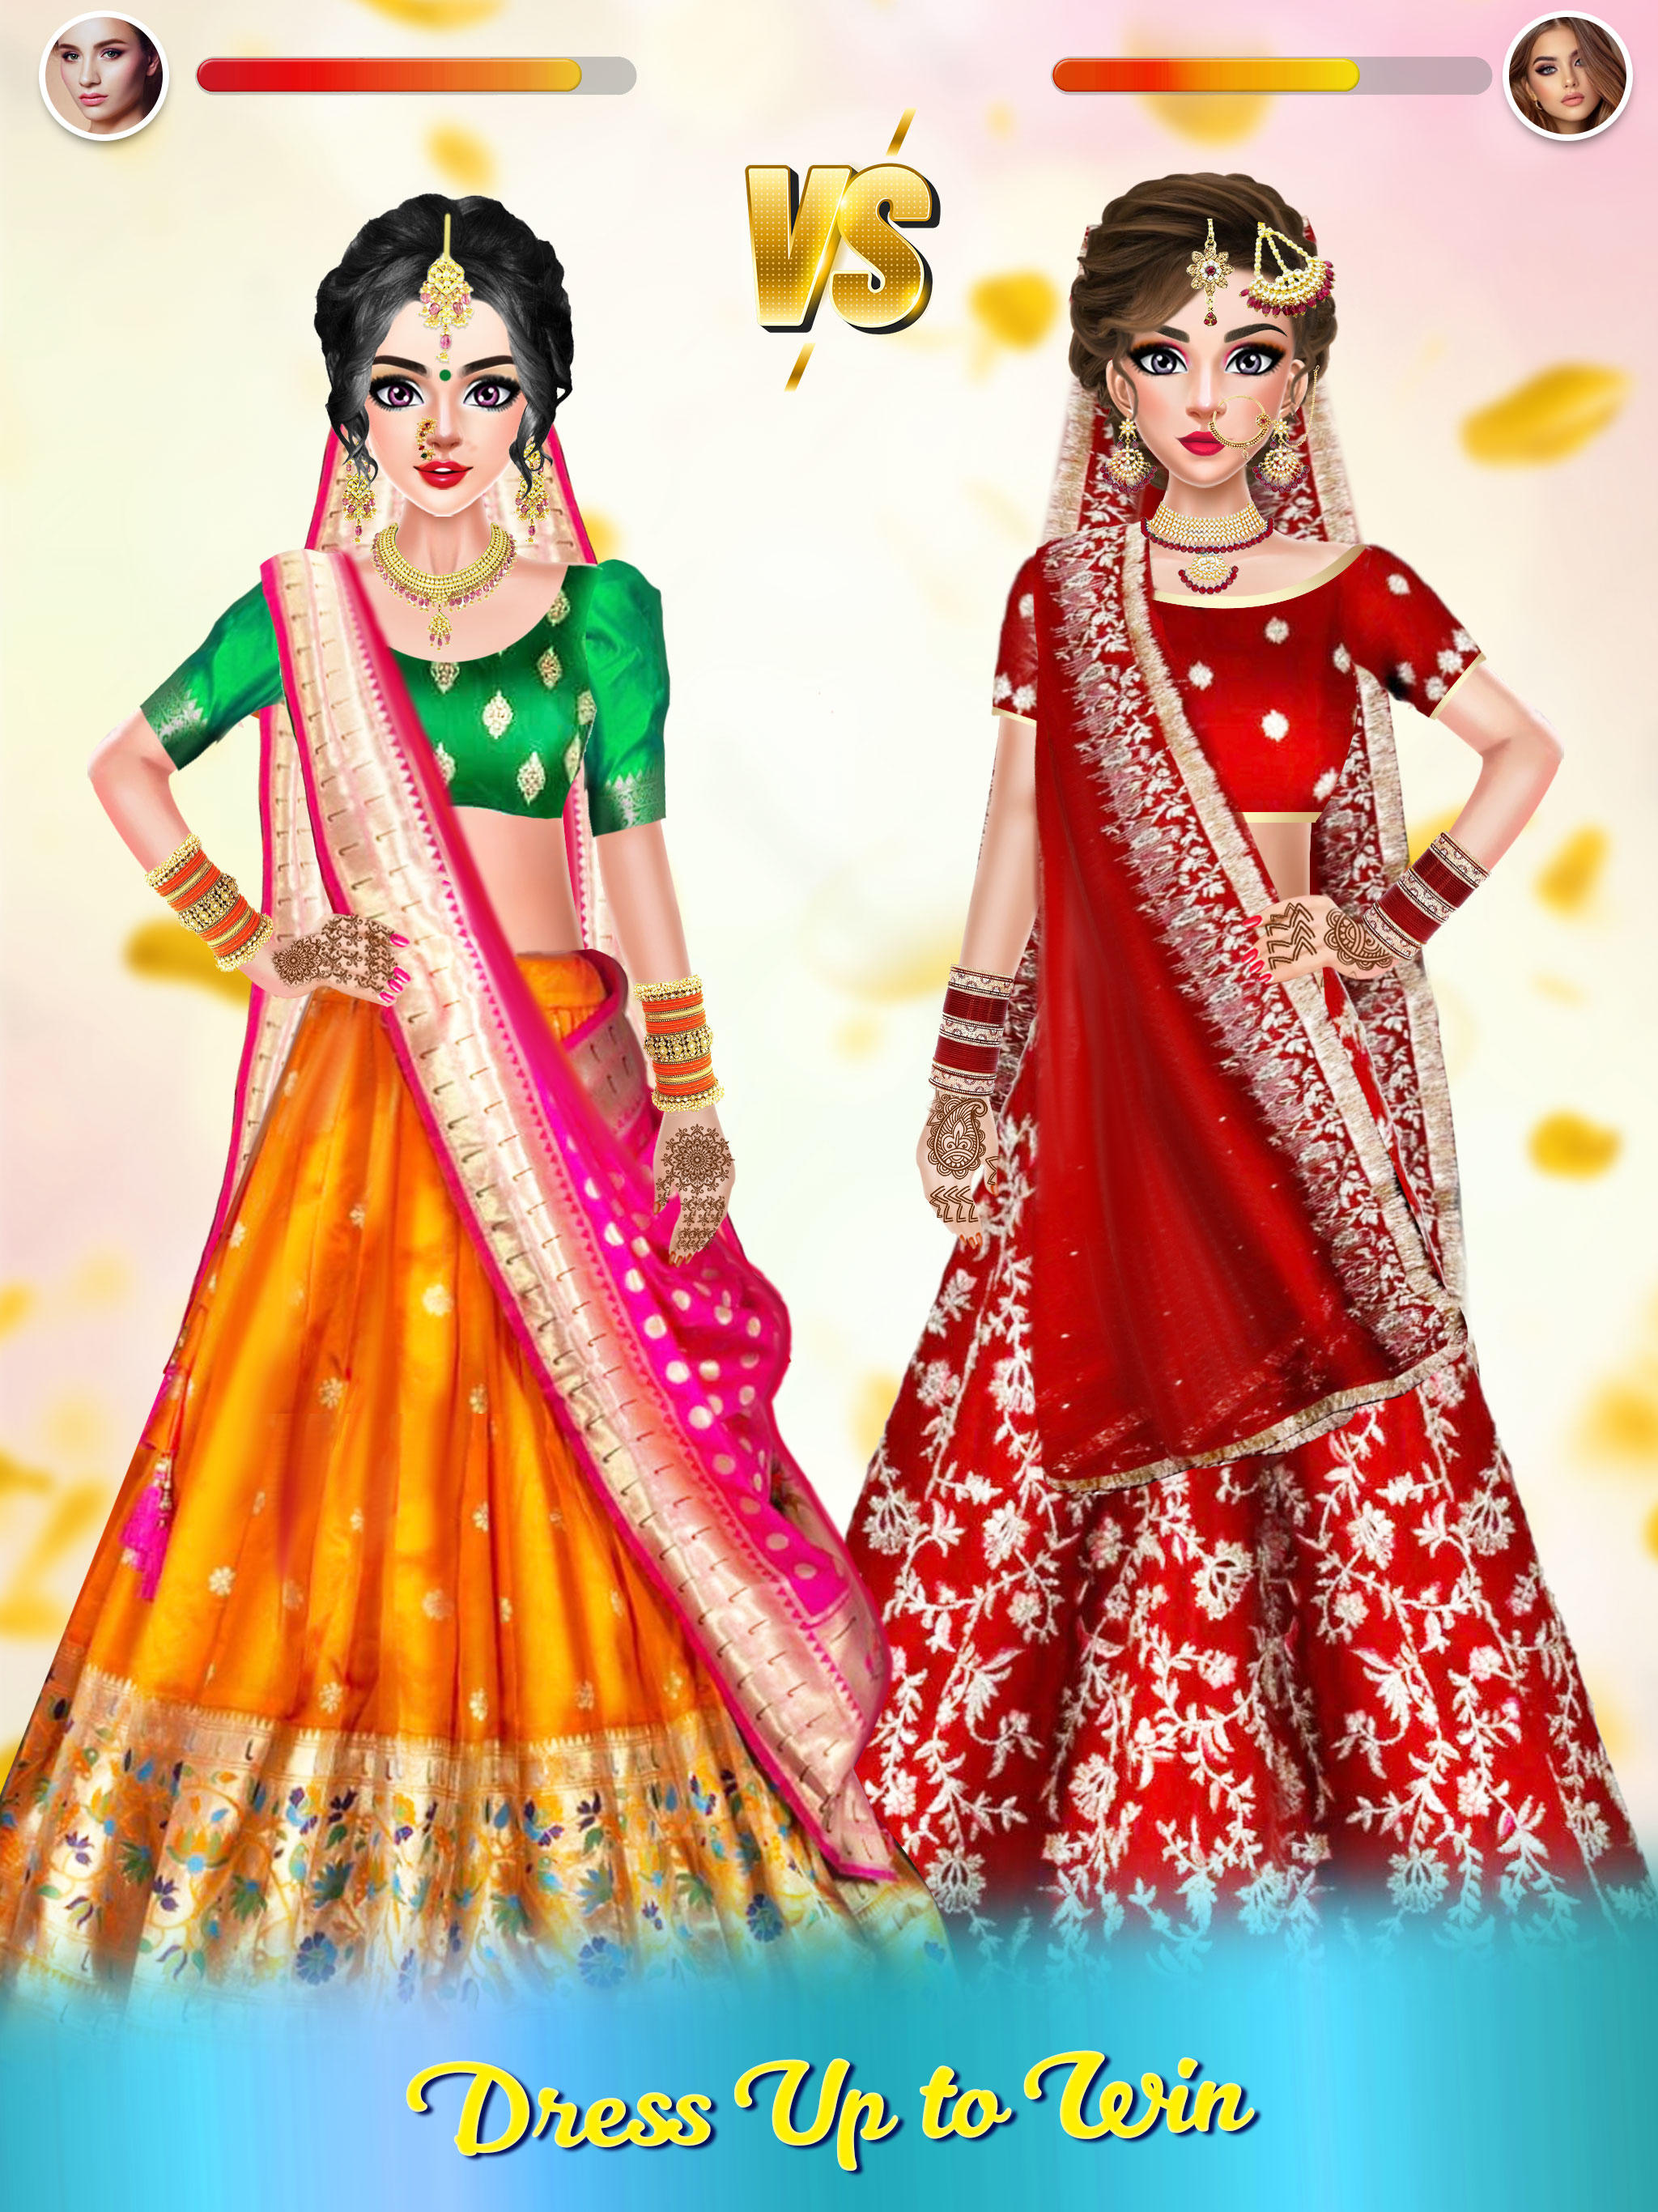 Royal Indian Western Makeup & Dressup Wedding Games-Dream Doll Decoration  and Stylist Salon Game-Makeup Artist-Wedding Dressup Game Makeover-Royal  Wedding Day-Wedding Games for Girls-FREE:Amazon.com:Appstore for Android